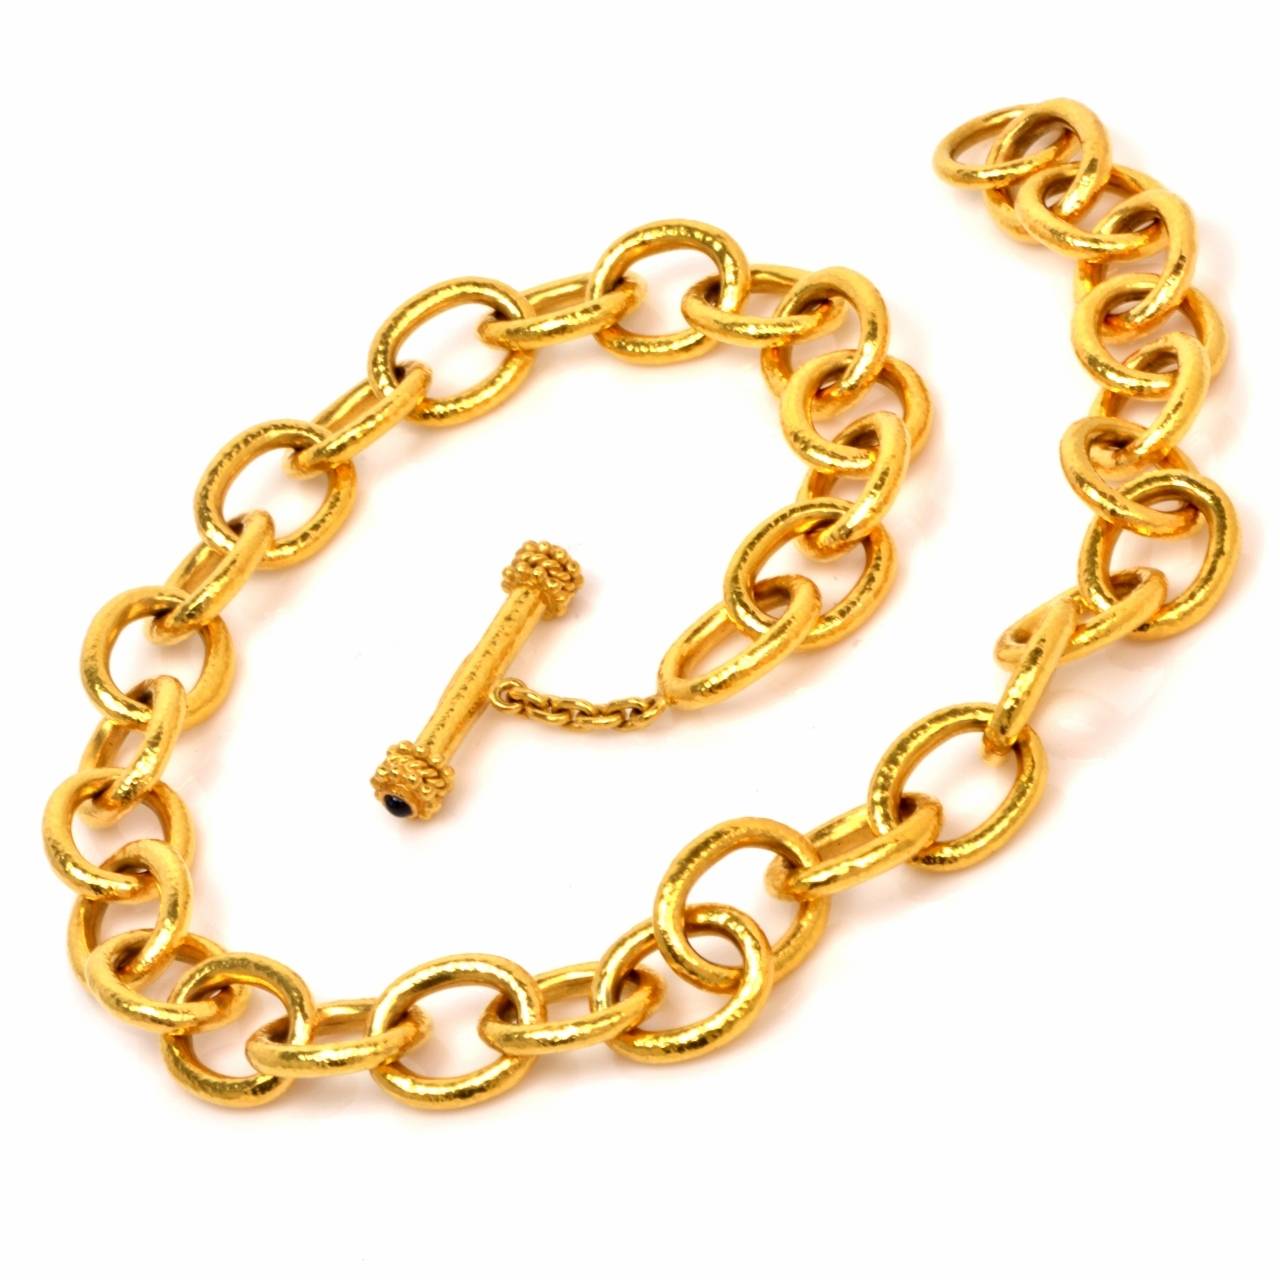 This impressive chain necklace designed by Elizabeth Locke is an authentic piece bearing the designer's hallmark, and is crafted in solid 19K yellow gold. It weighs approximately 98.3  grams and measures approx. 16.5